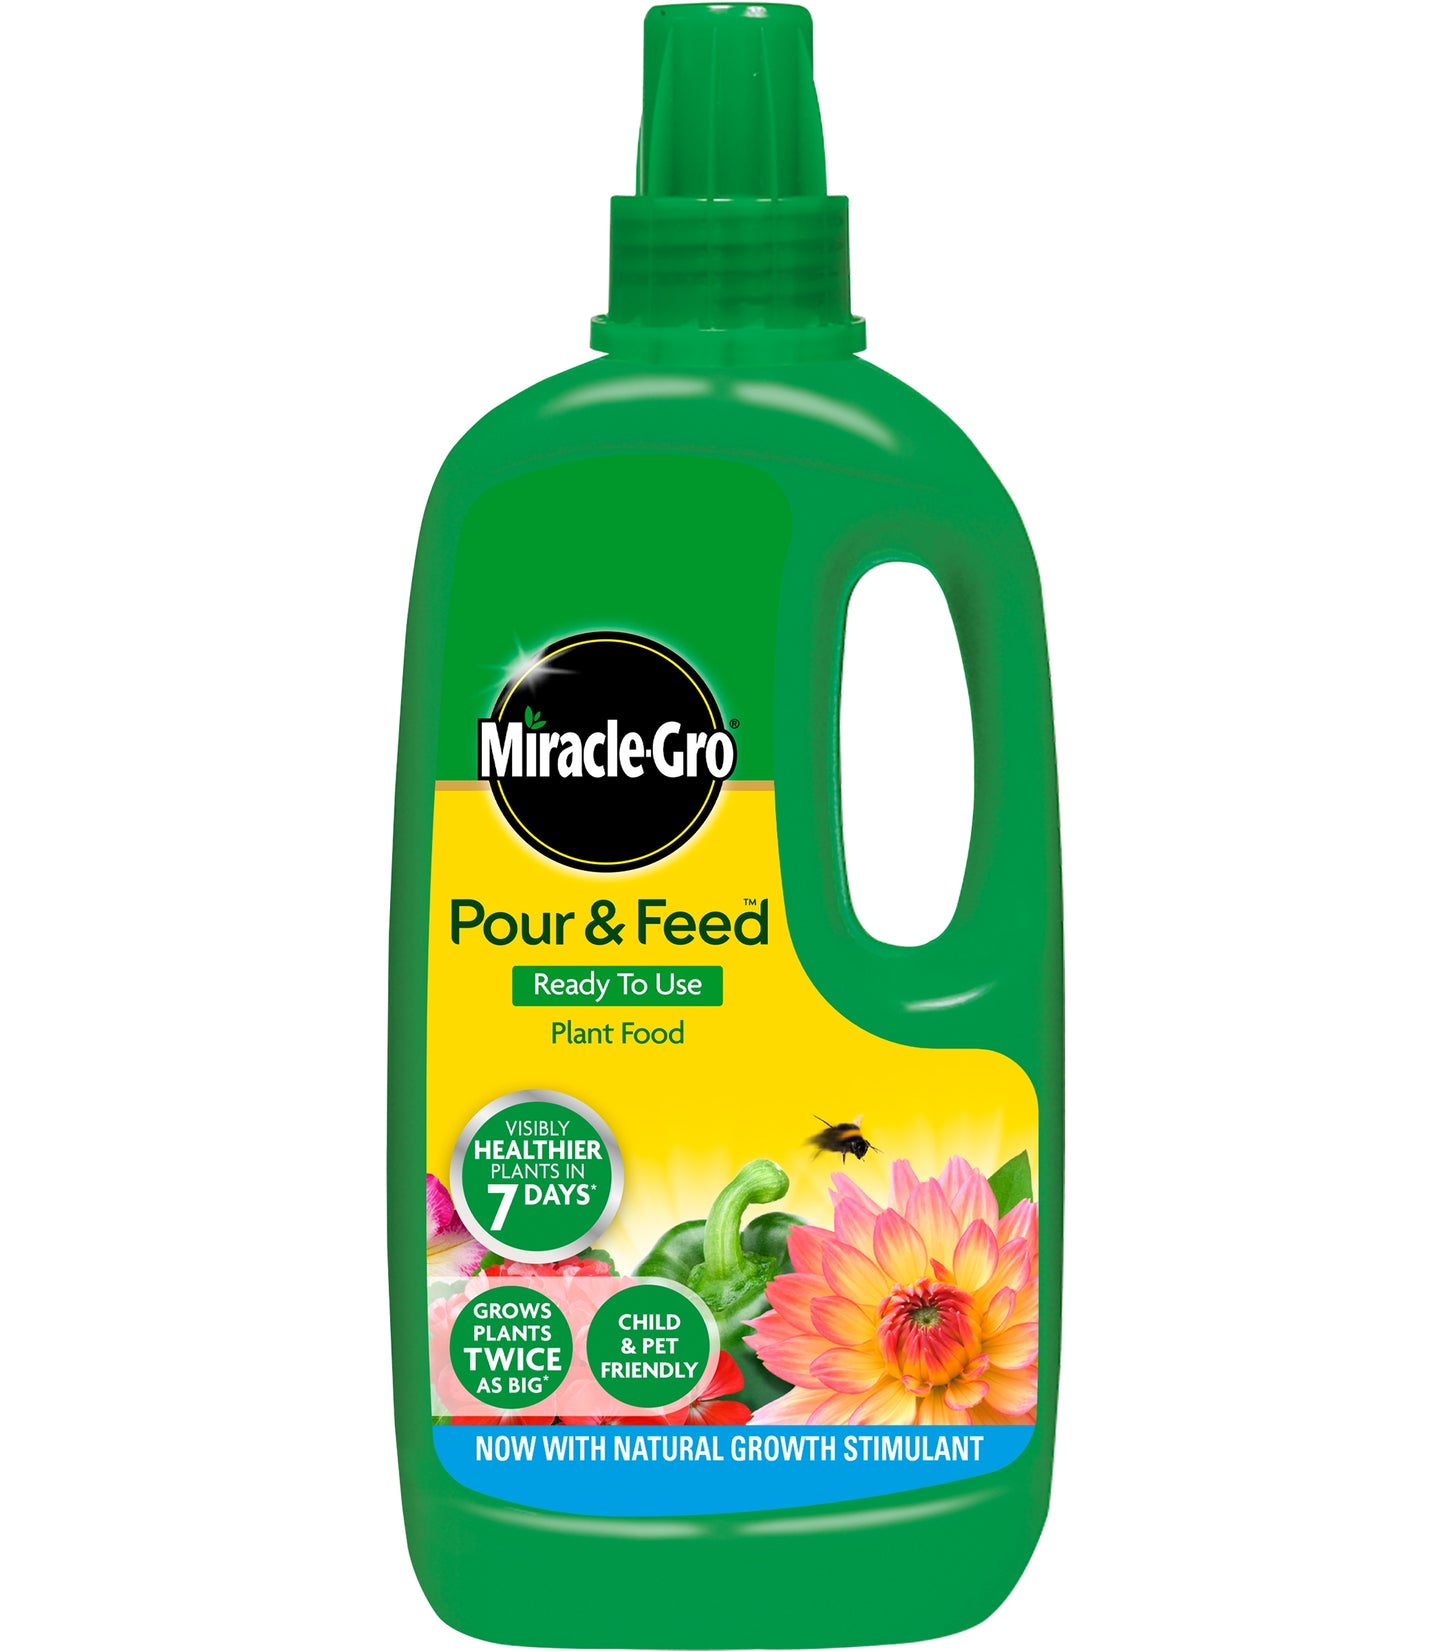 Miracle-Gro Pour & Feed Ready To Use Plant Food 1L